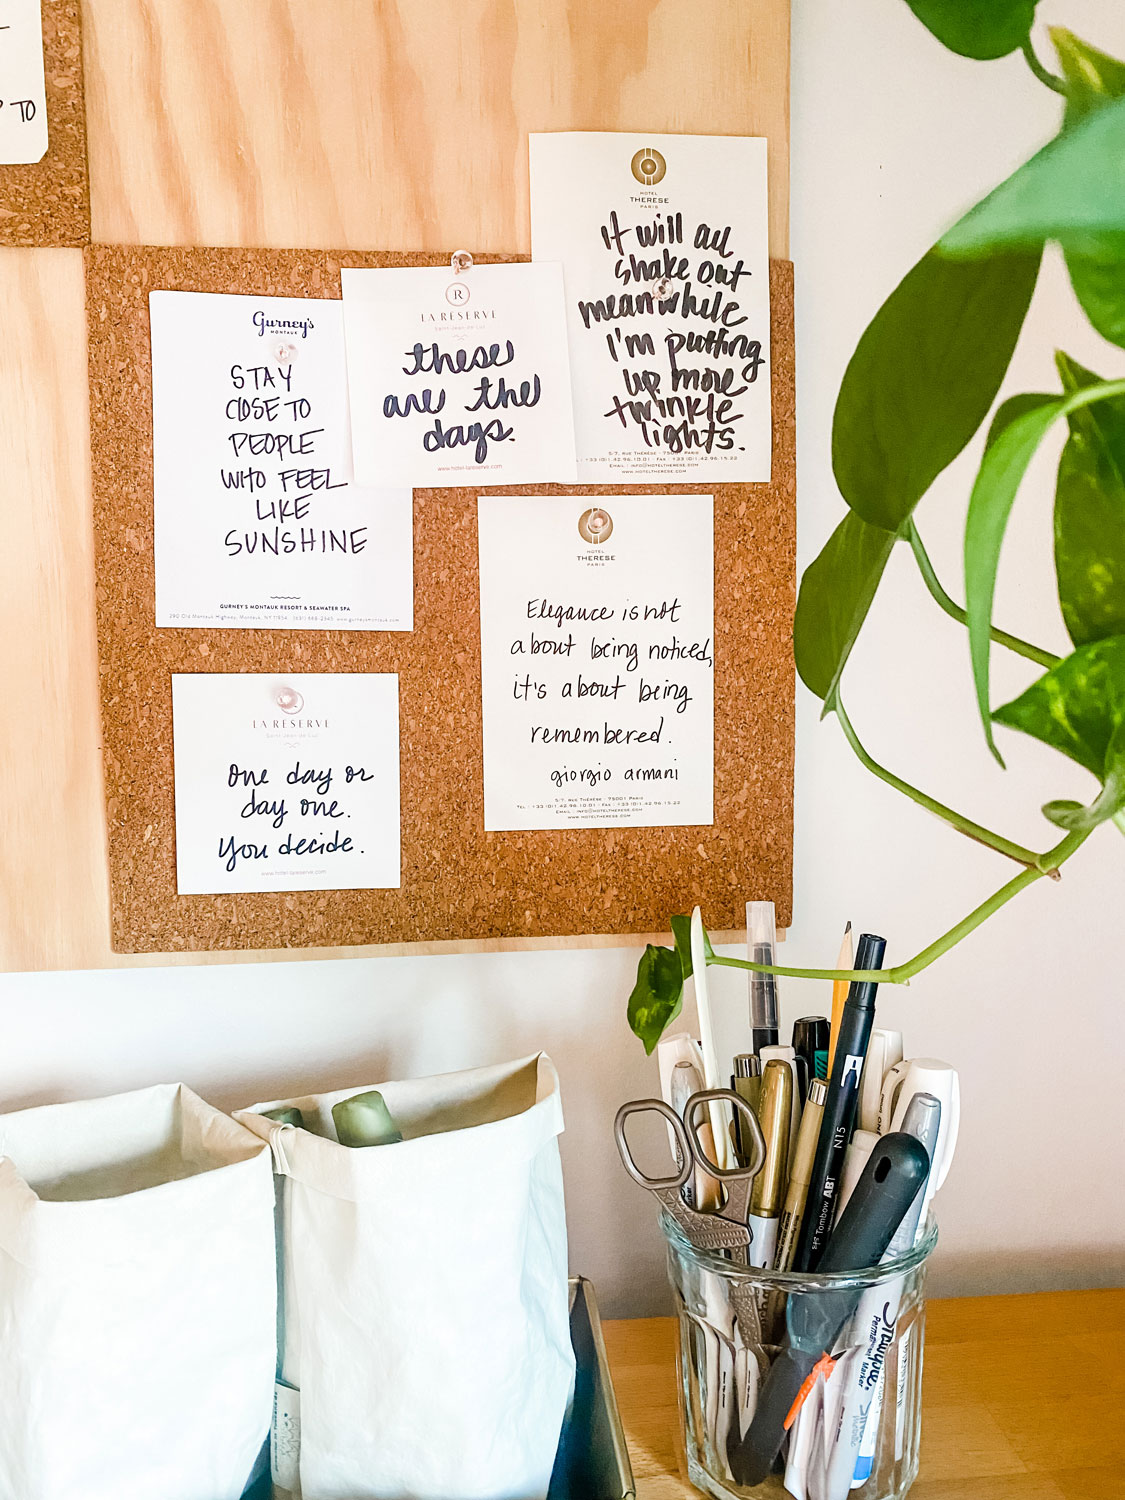 How to make a cork board wall: make working from home practical